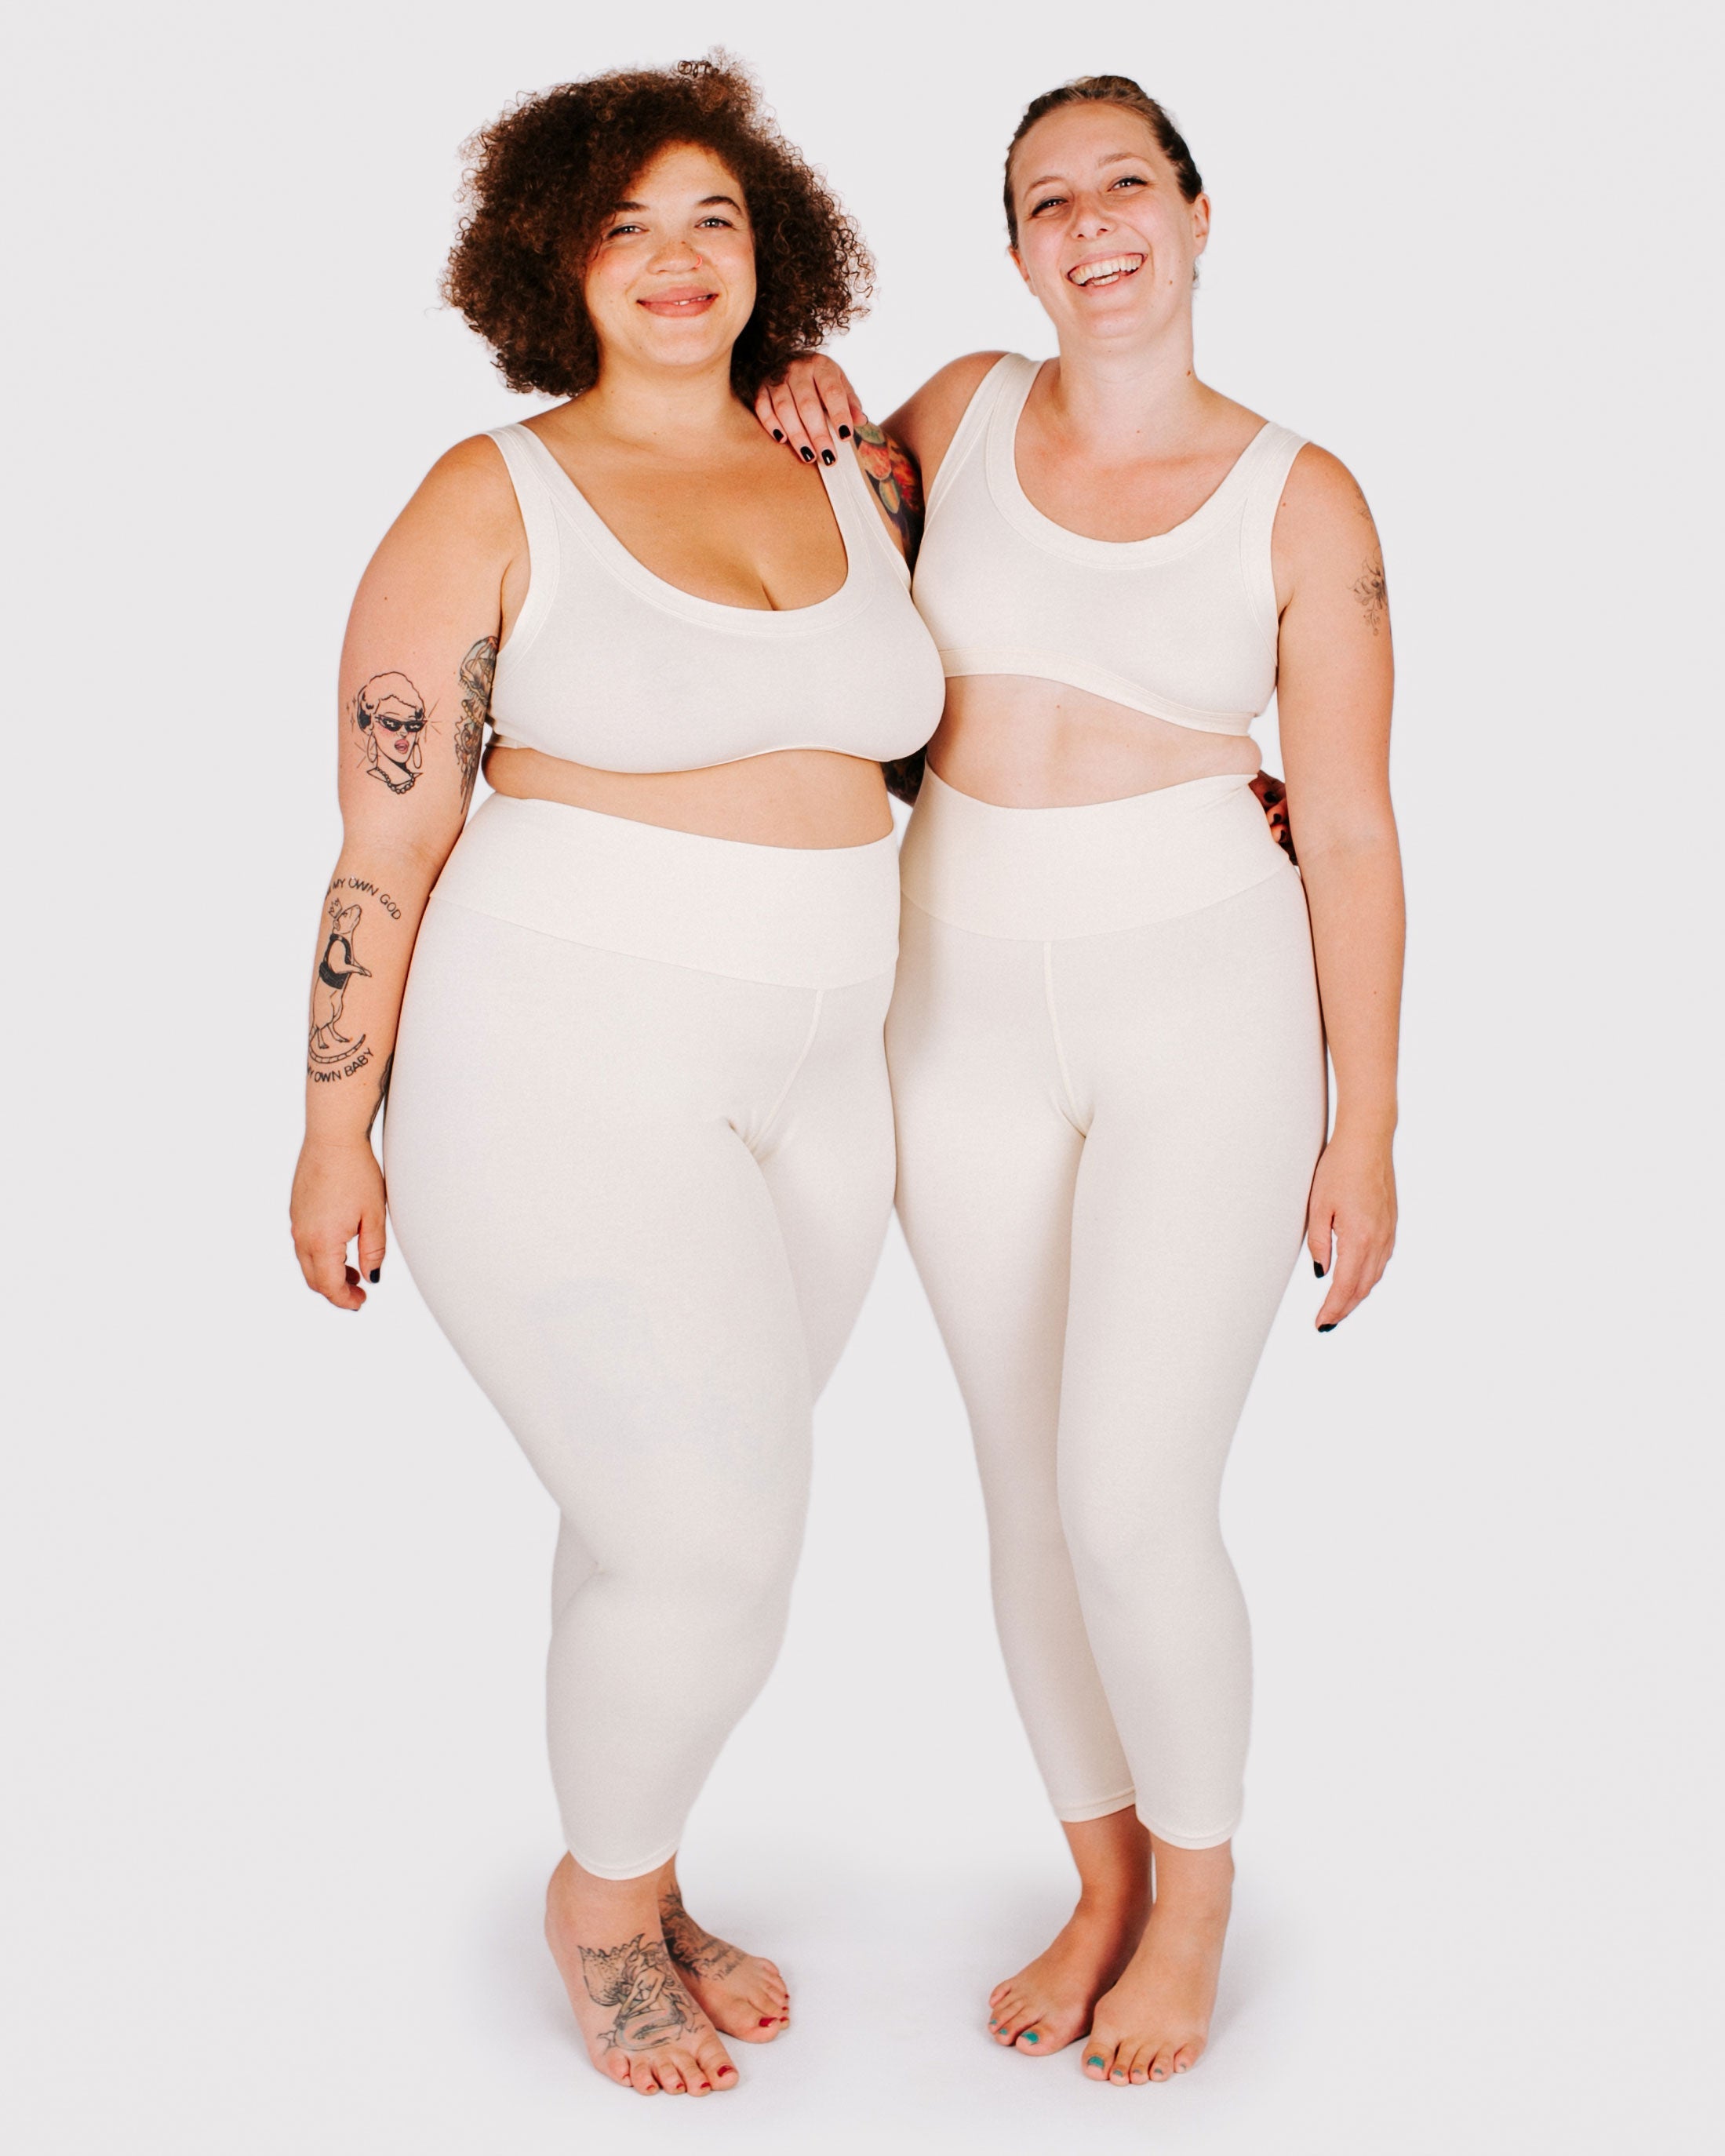 Fit photo from the front of Thunderpants organic cotton 3/4 Length Leggings and Bralettes in off-white on two model standing together.